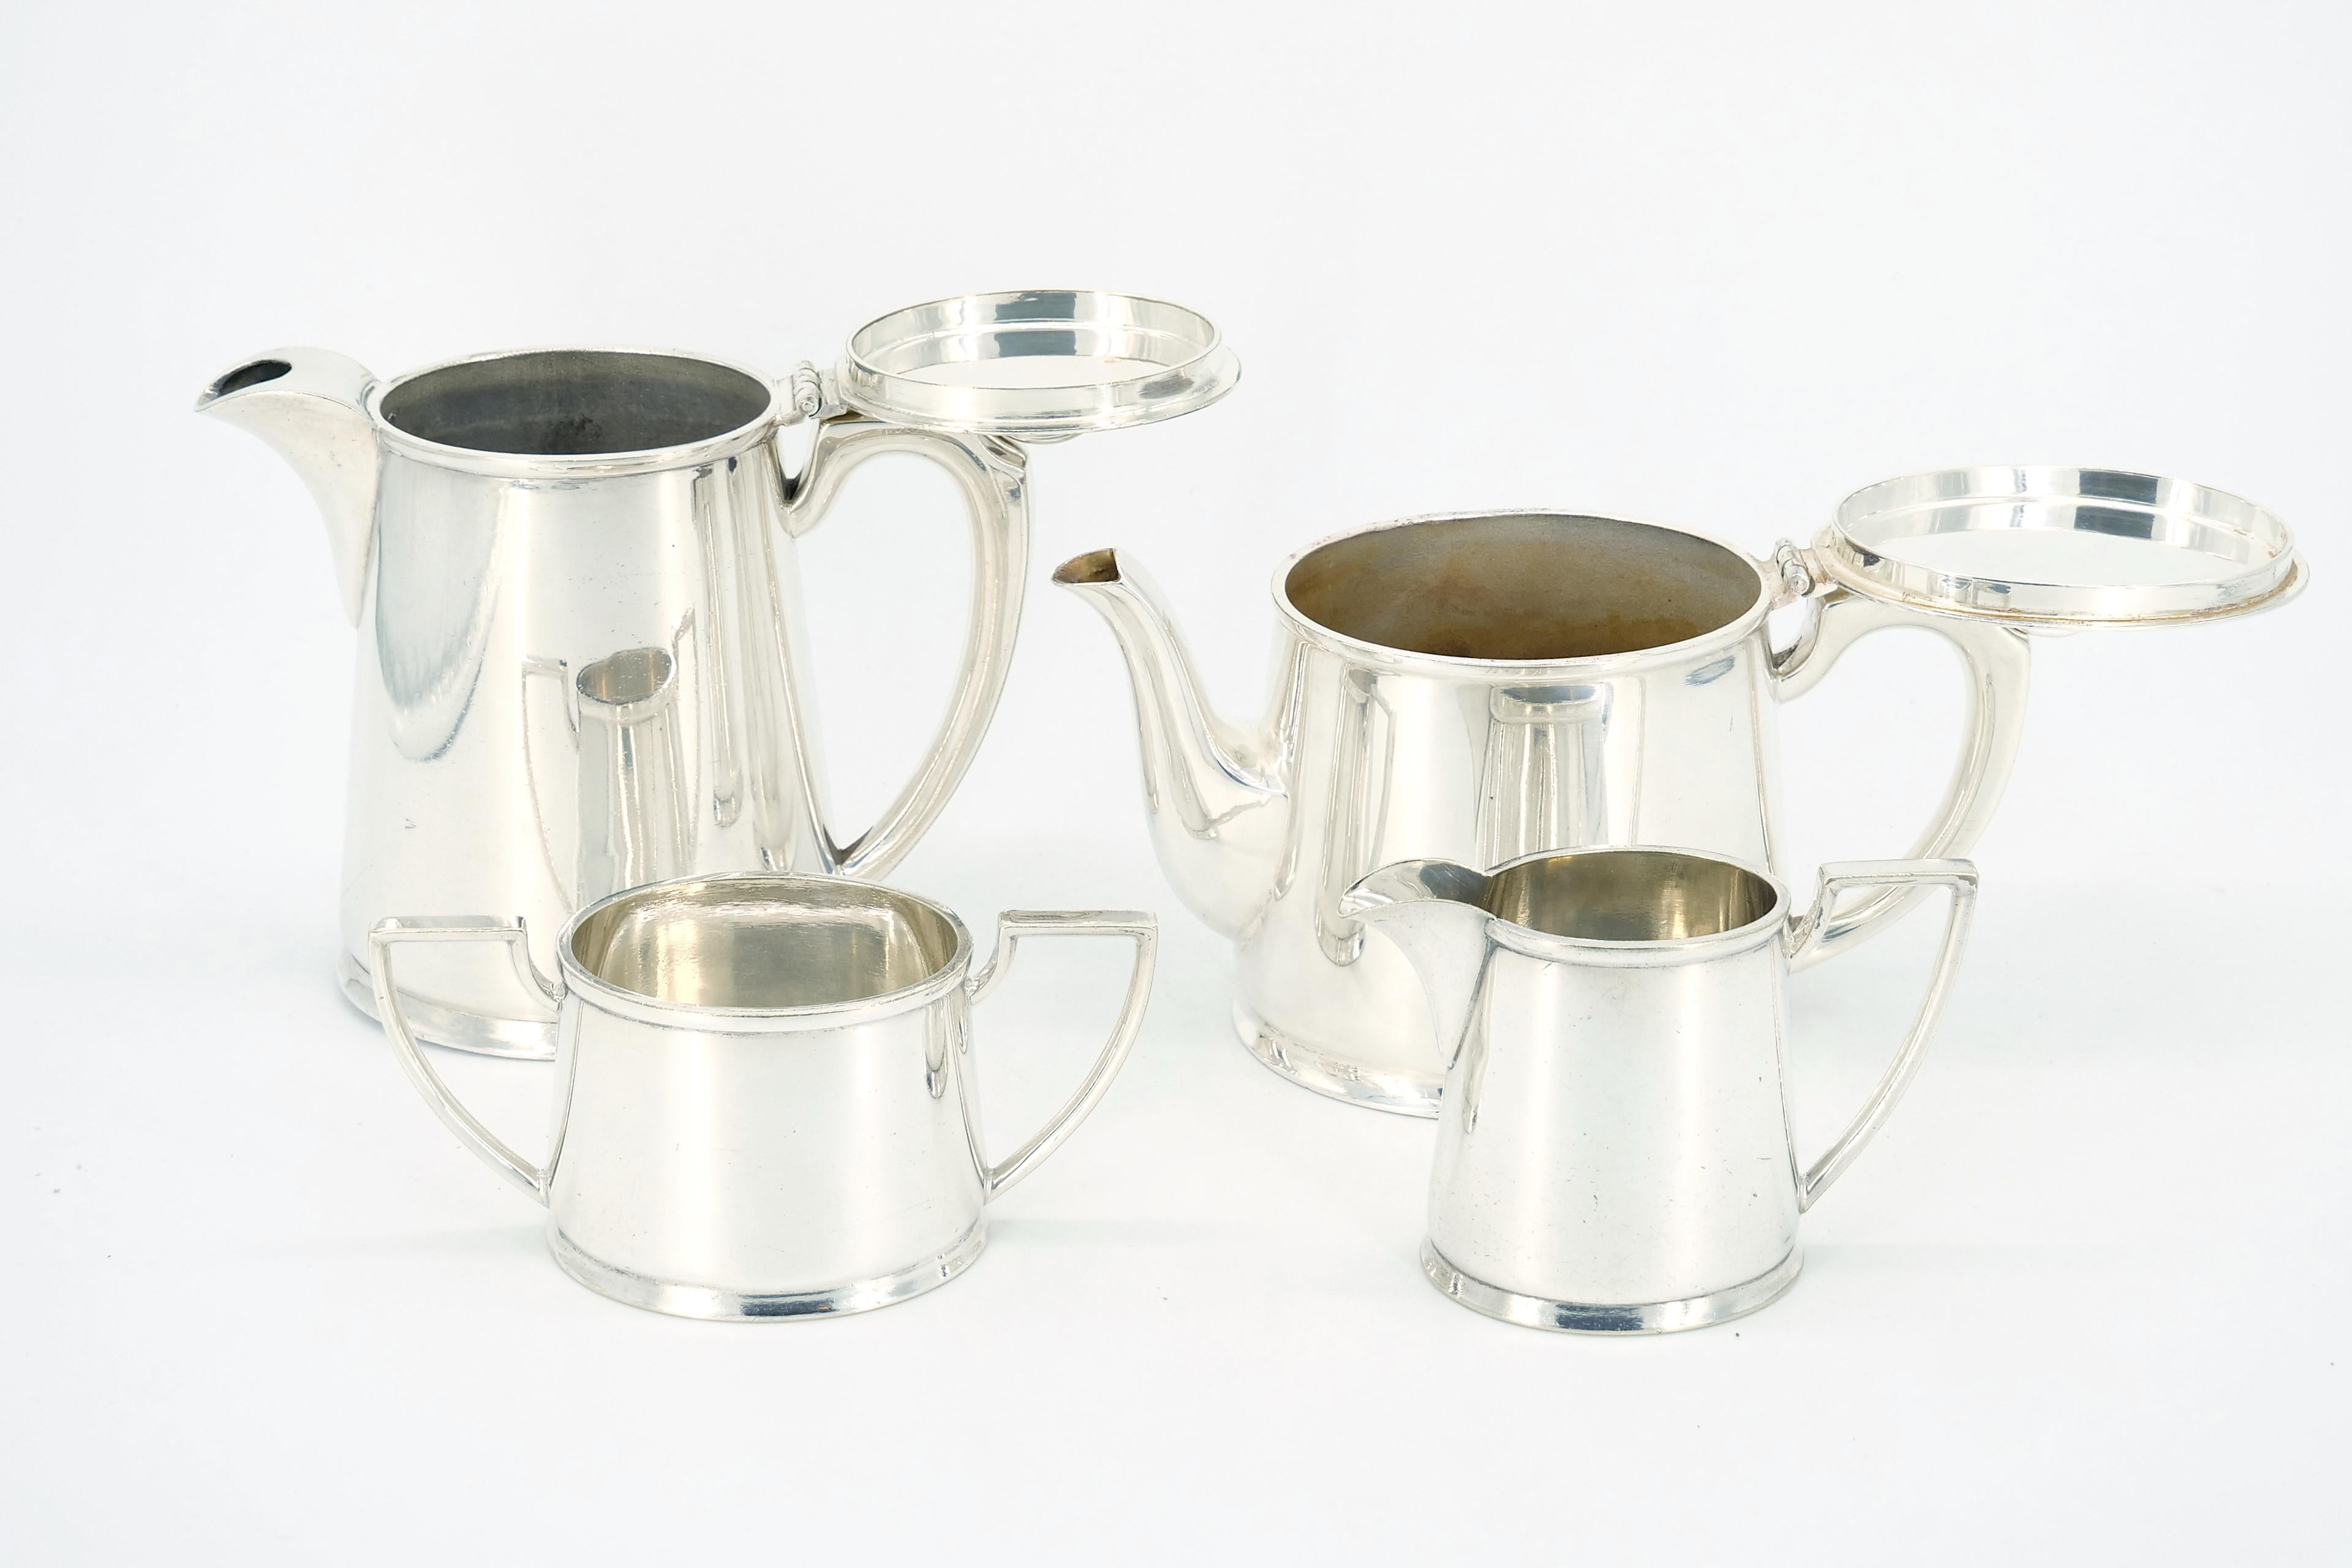 Indulge in the timeless elegance of this Edwardian-period English silver-plate four-piece tea and coffee service, crafted with clean lines in the sophisticated Art Deco style by the renowned Walker and Hall of Sheffield. This exquisite set adds a